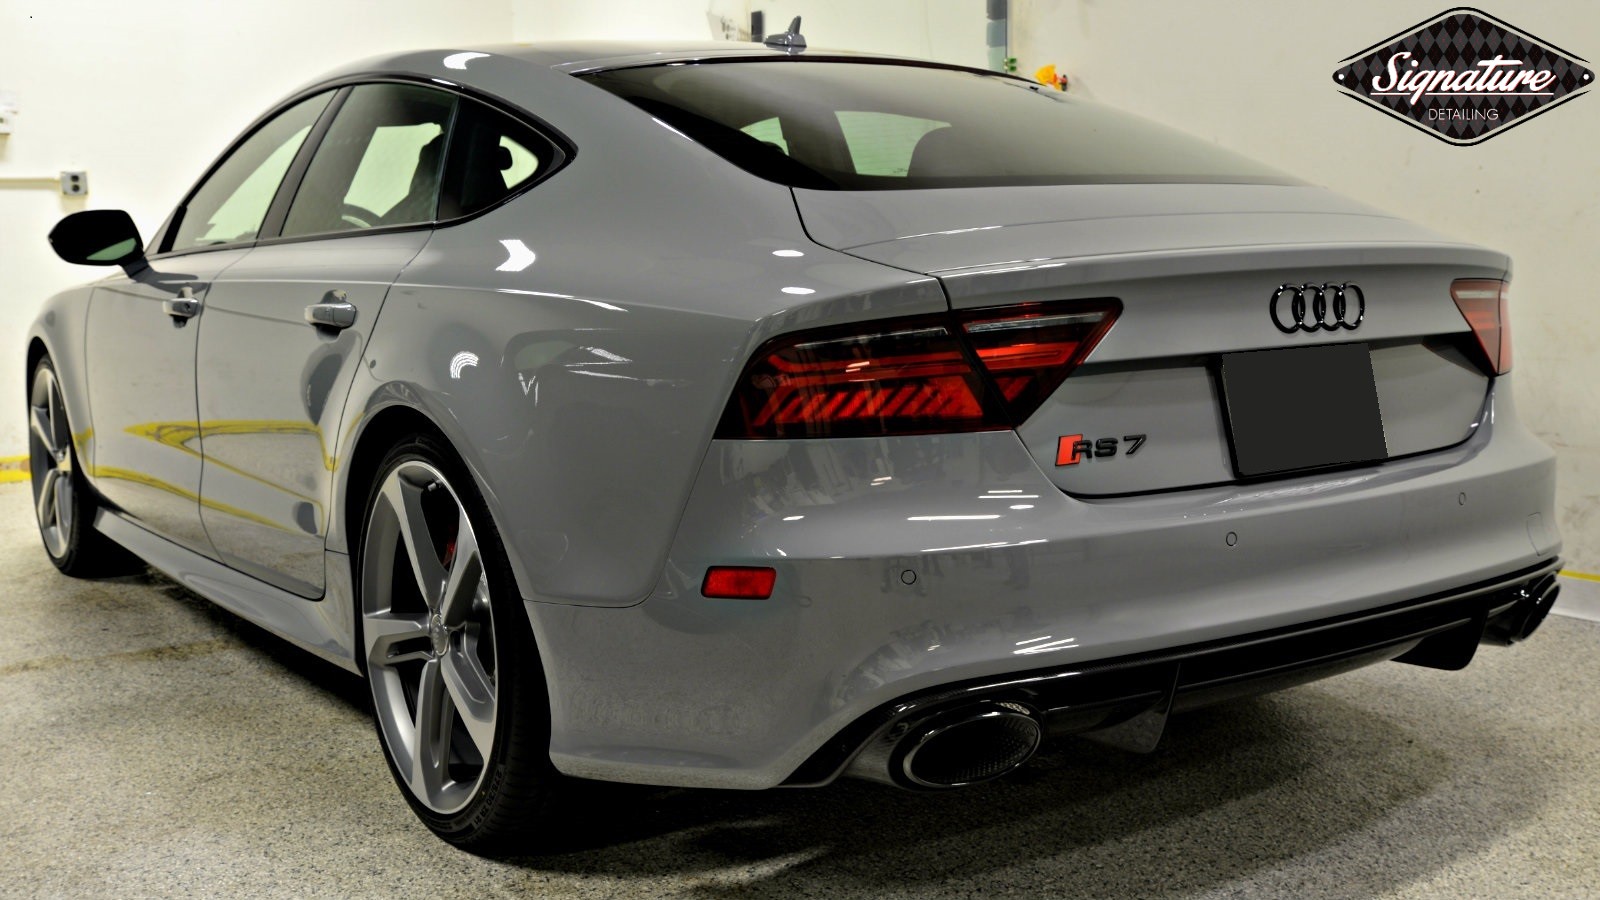 Audi RS7 shines with protection from ceramic nano coating from Signature Detailing NJ